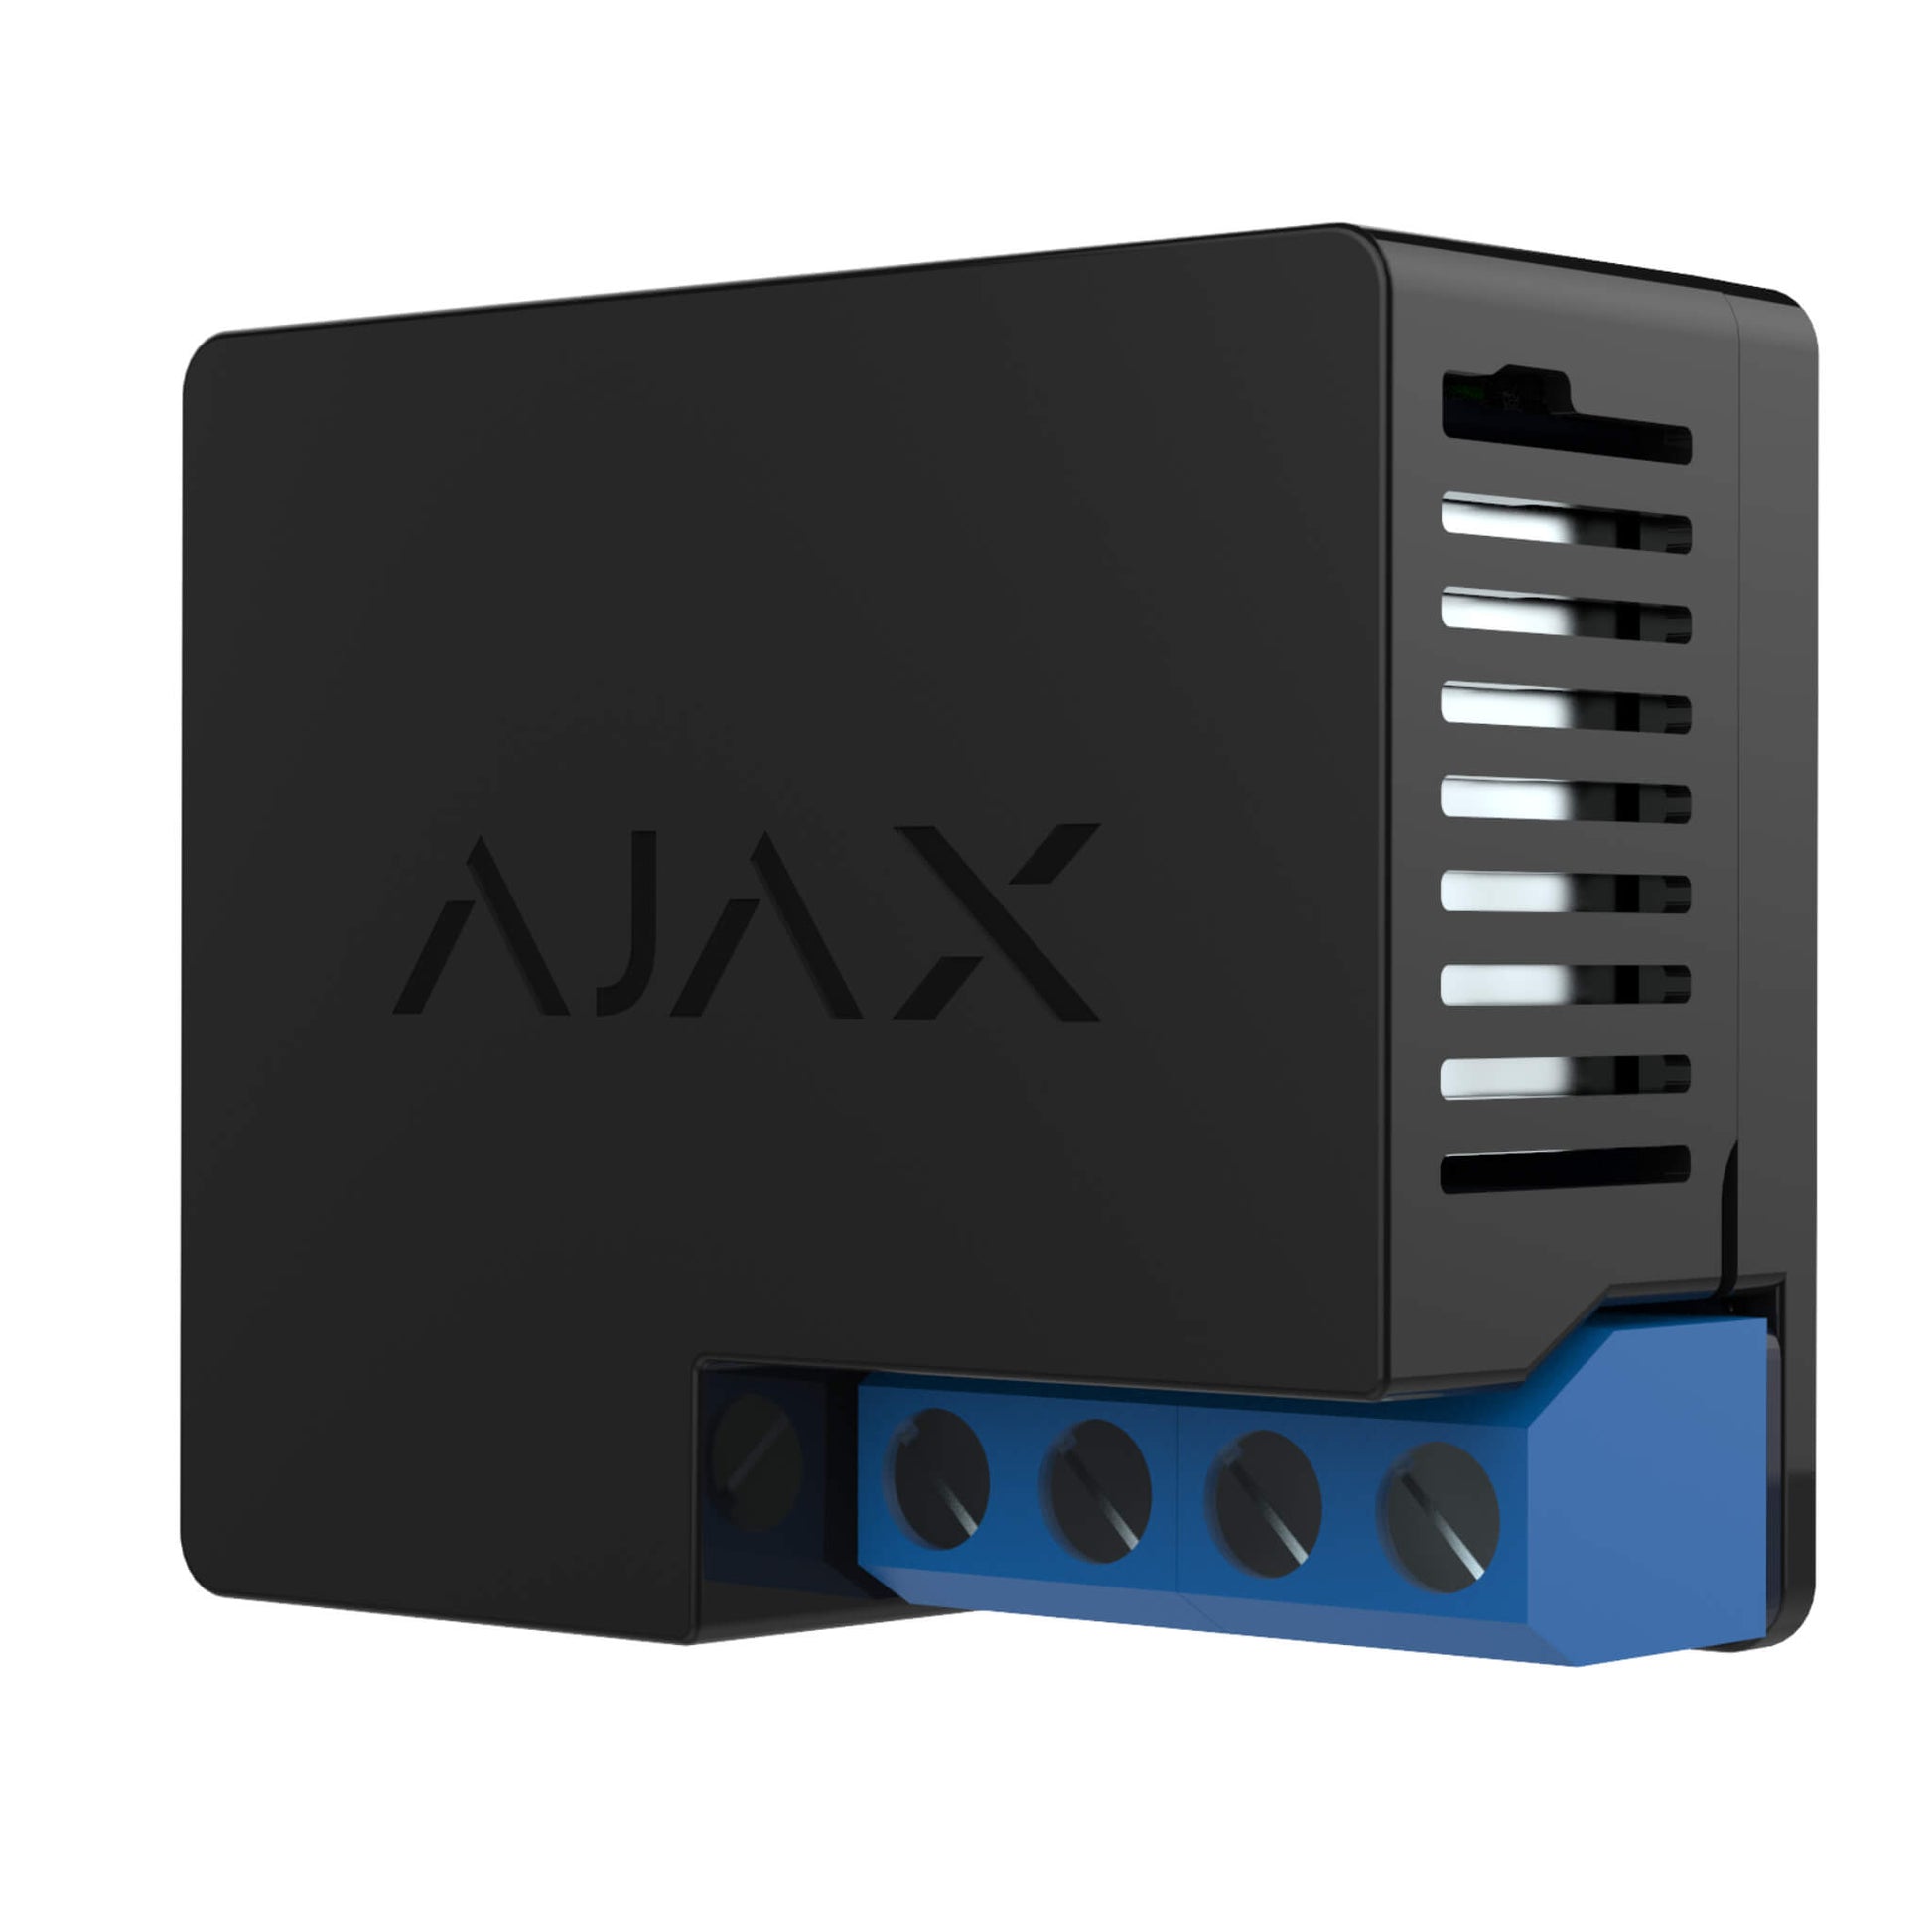 Black Ajax WallSwitch a device used to control 230volt appiances in youre home or business, connection is normally open or normally closed. The device is 39 × 33 × 18 mm in size , 30grams in weight. is Wall mountable using DIN holder. Side view of device for indoor installation only.